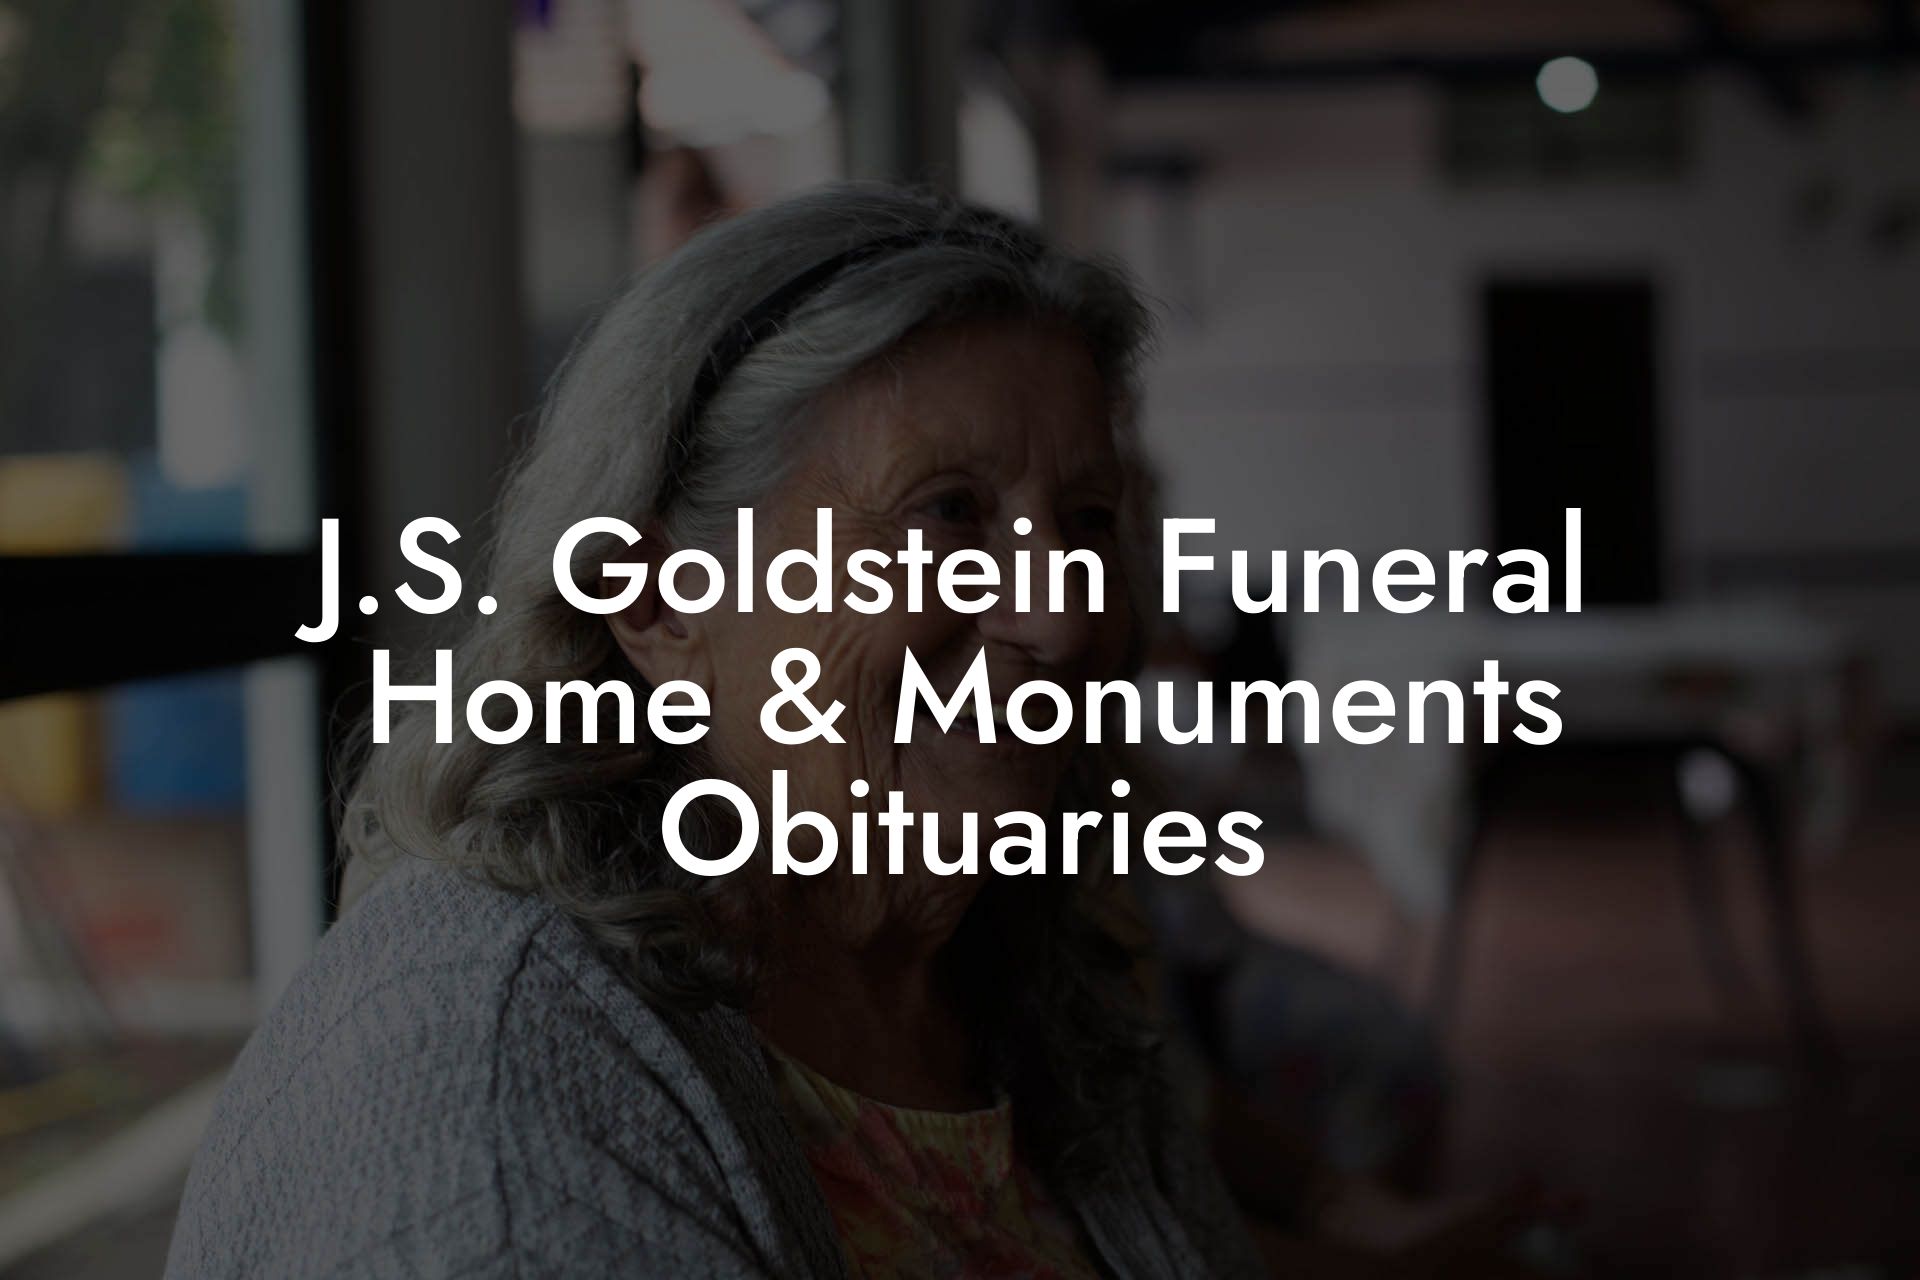 J.S. Goldstein Funeral Home & Monuments Obituaries